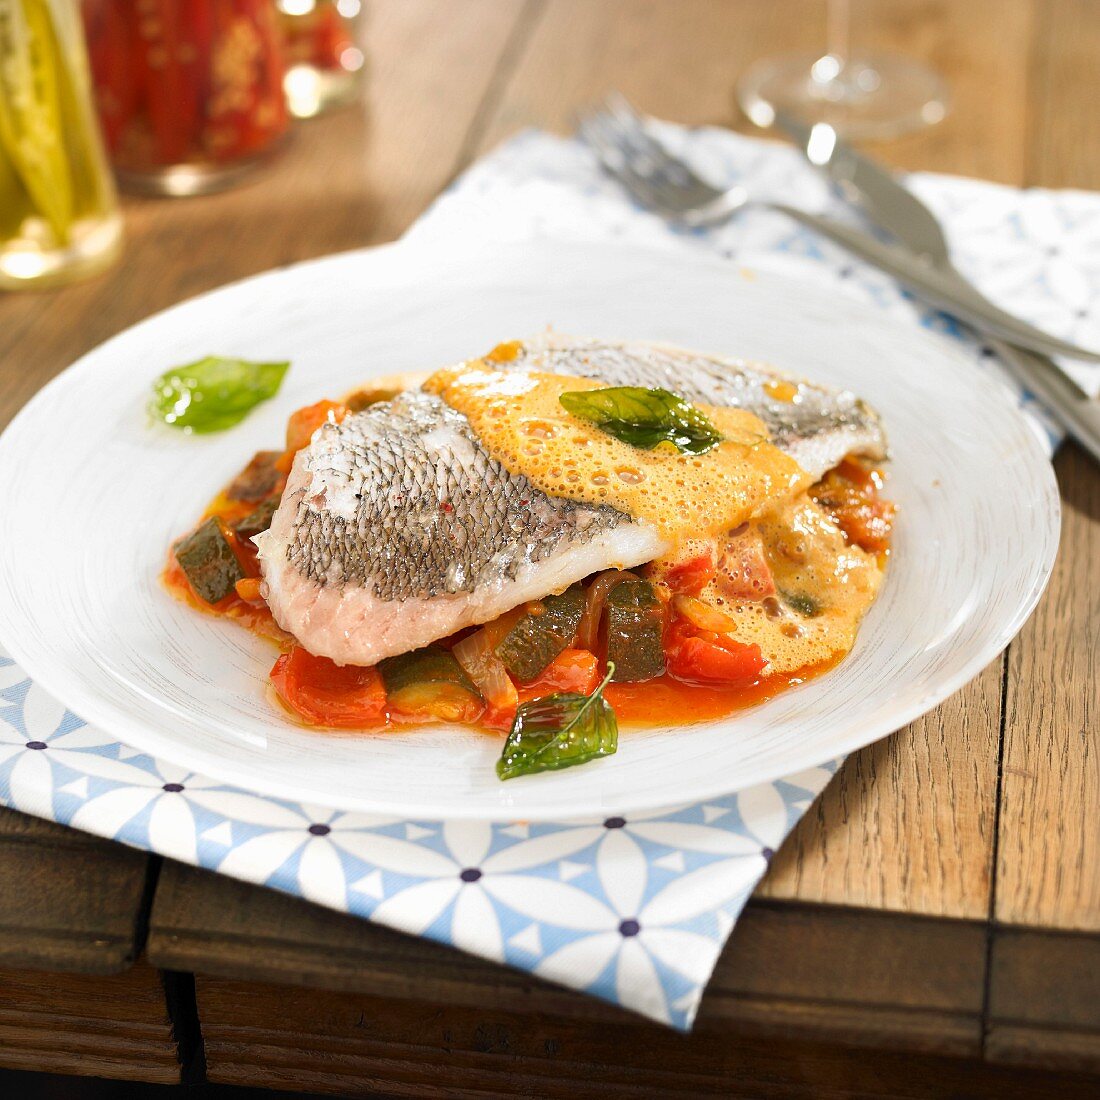 Steamed sea bream fillet on a bed of ratatouille